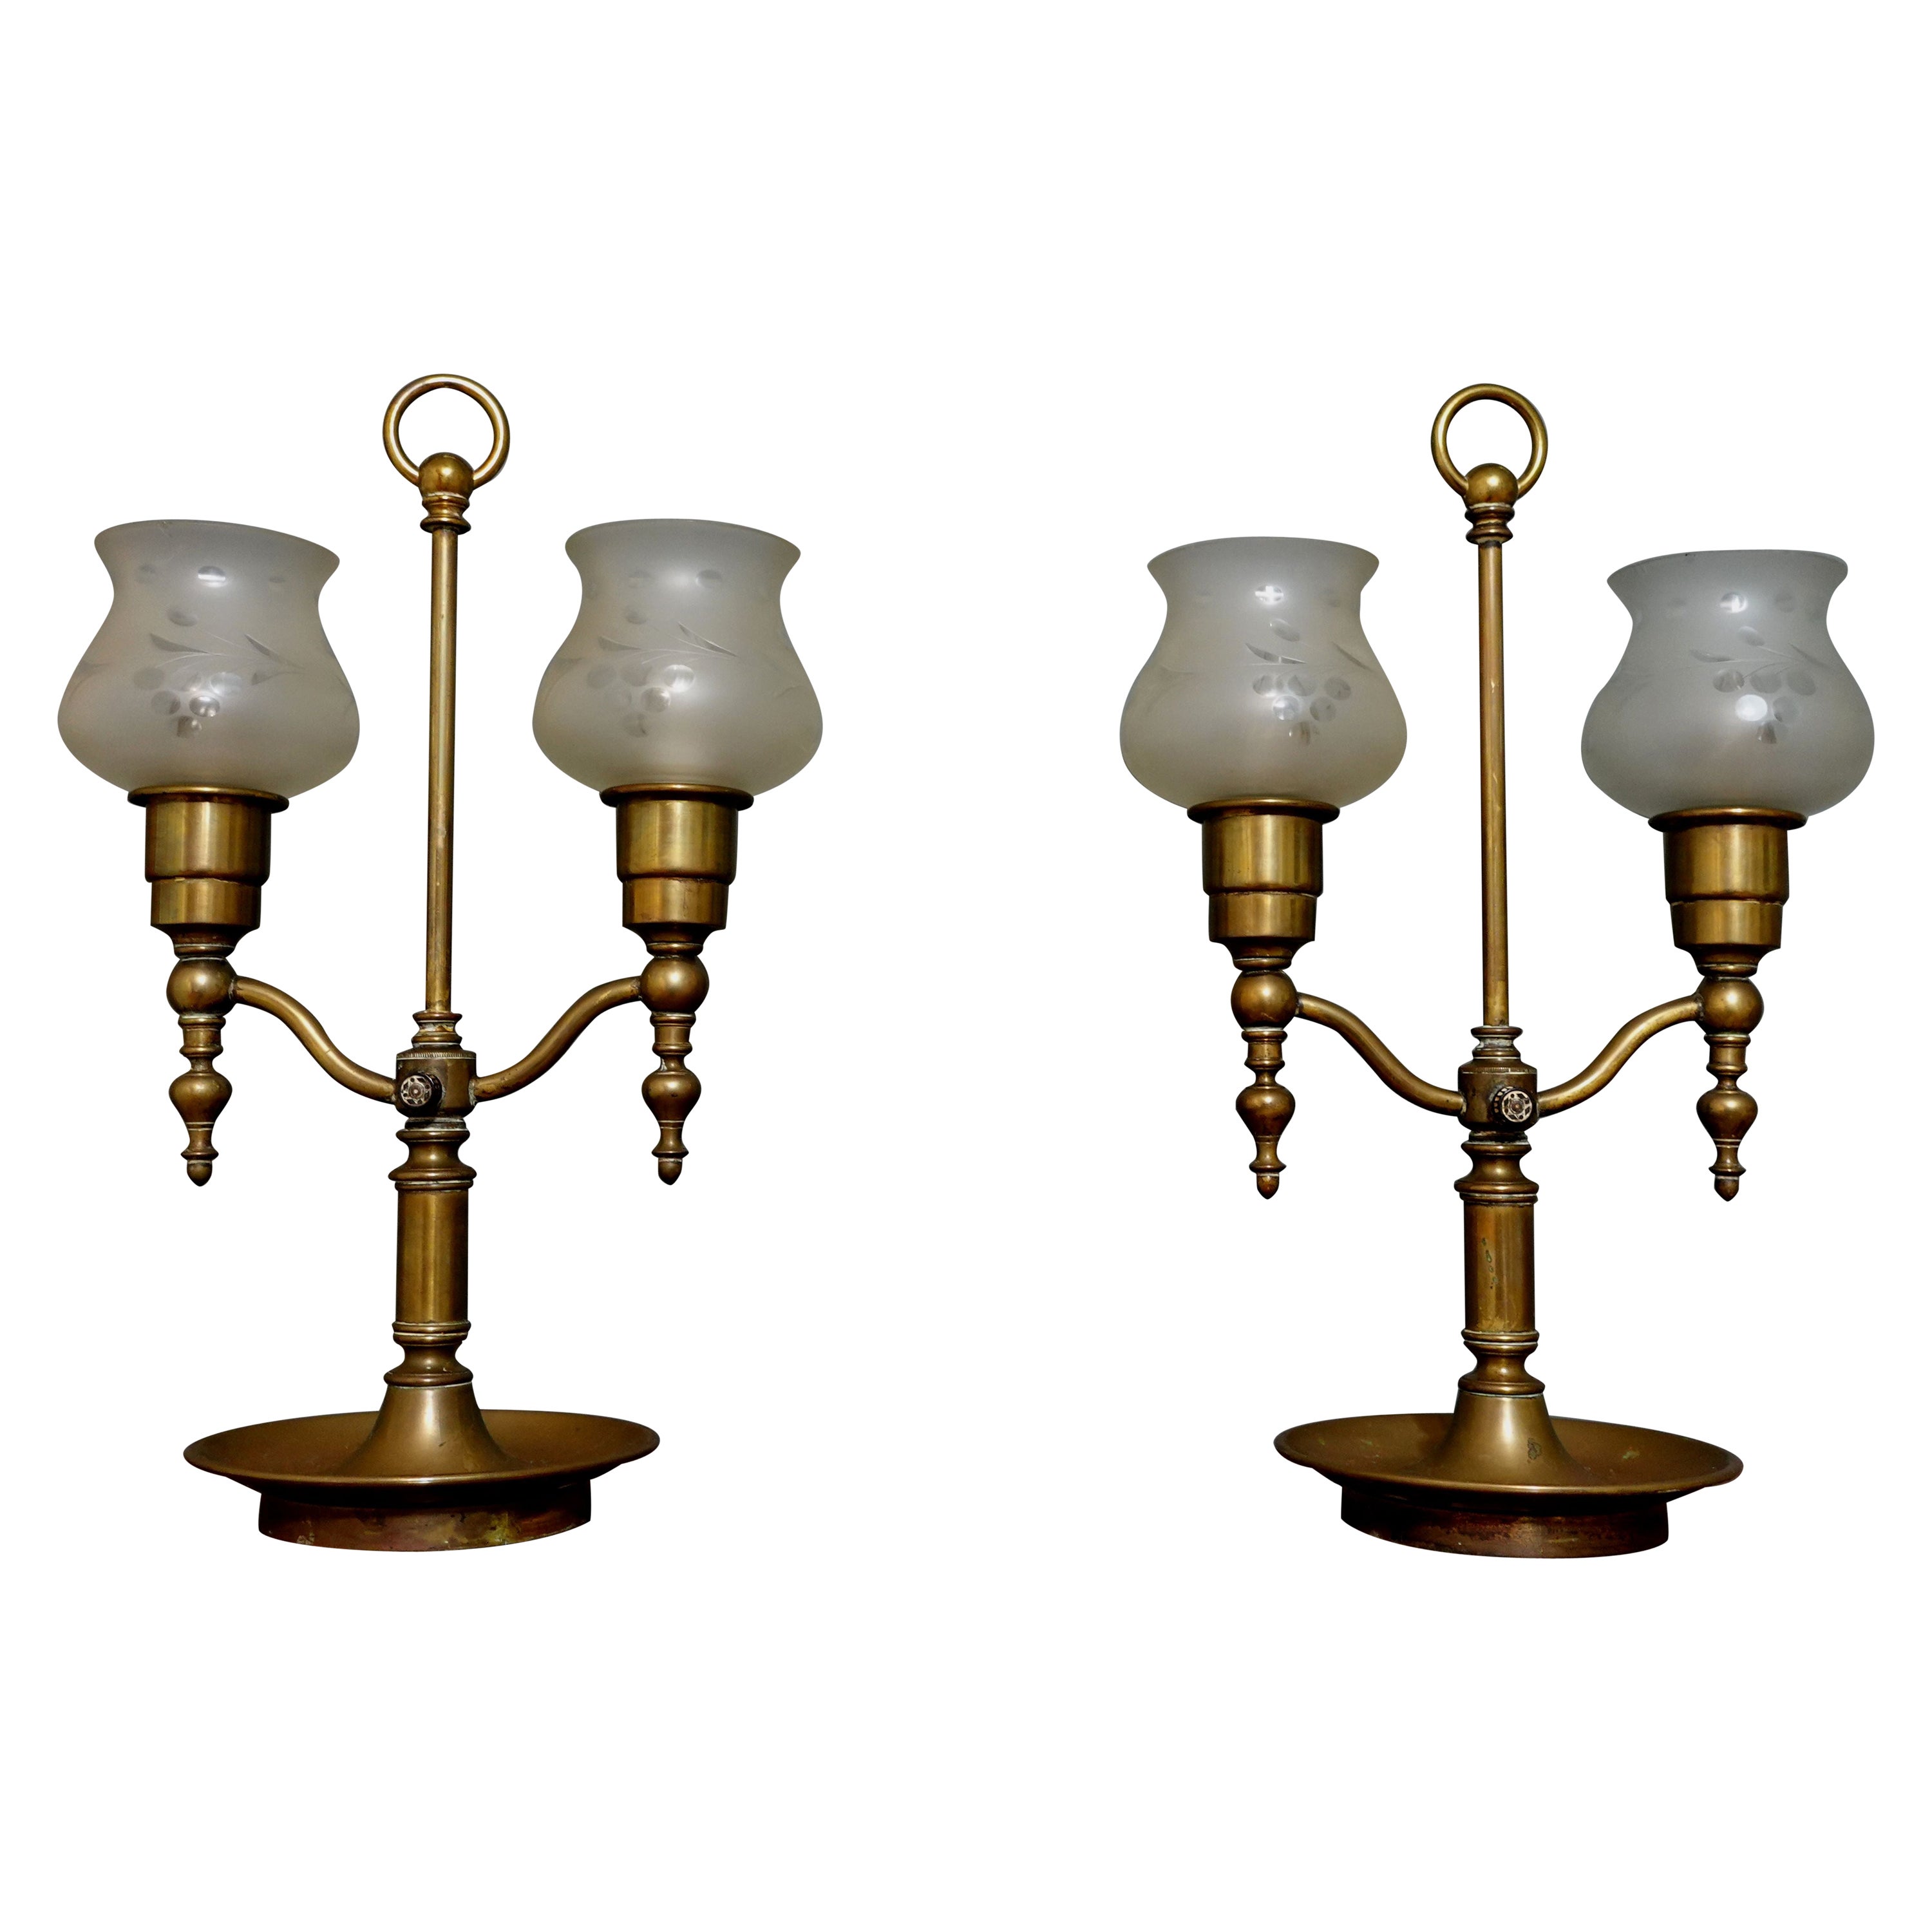 Antique Pair of Large Double Arm Brass Hurricane Lamps, 1900s